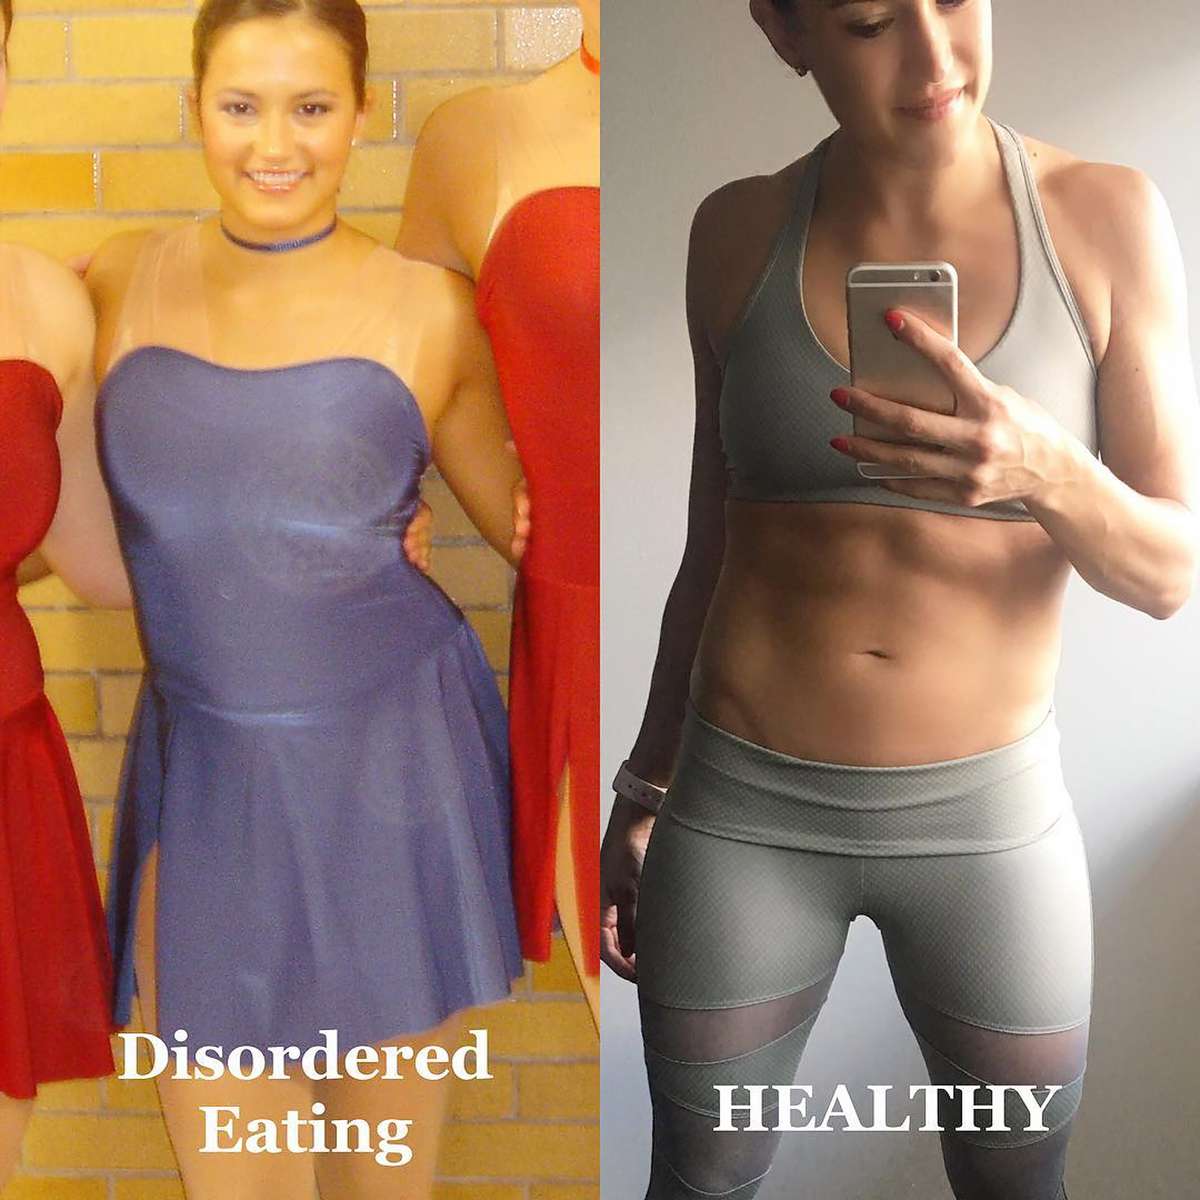 Anorexia Survivor Shows Disordered Eating Doesn’t Always Look 'Scary Skinny'